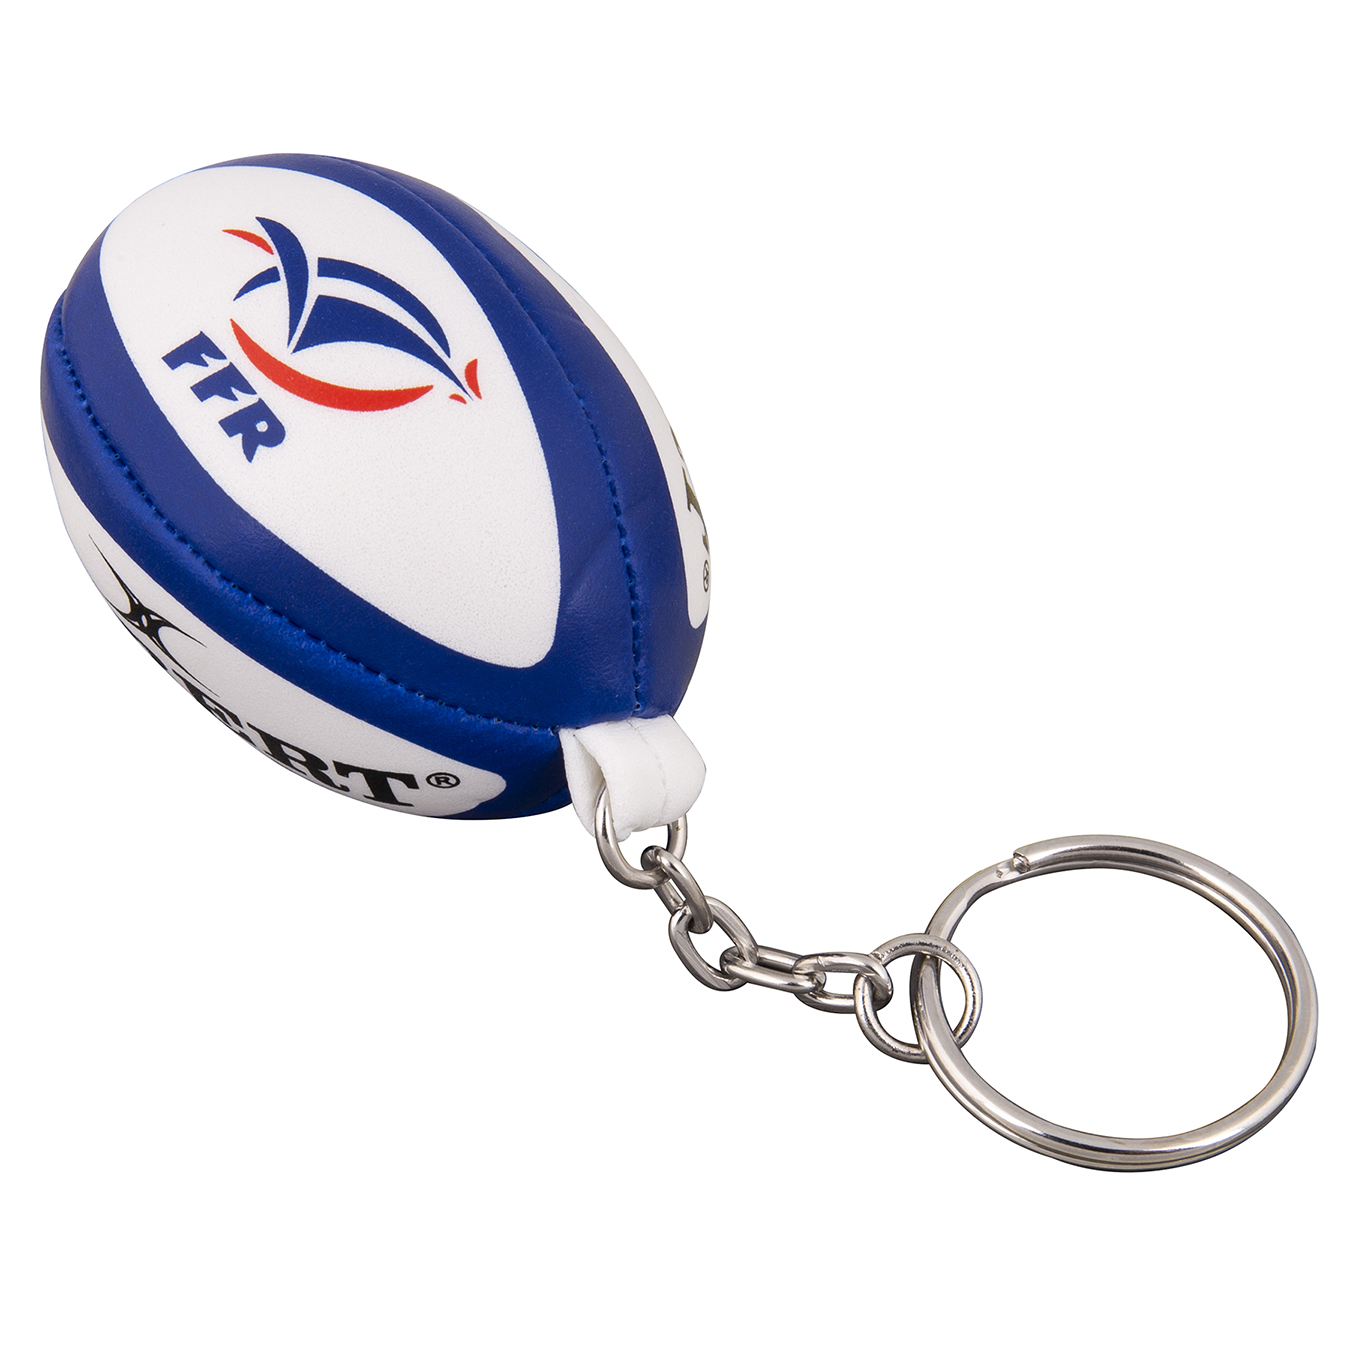 PORTE CLEF GILBERT FRANCE - Univers Crampons